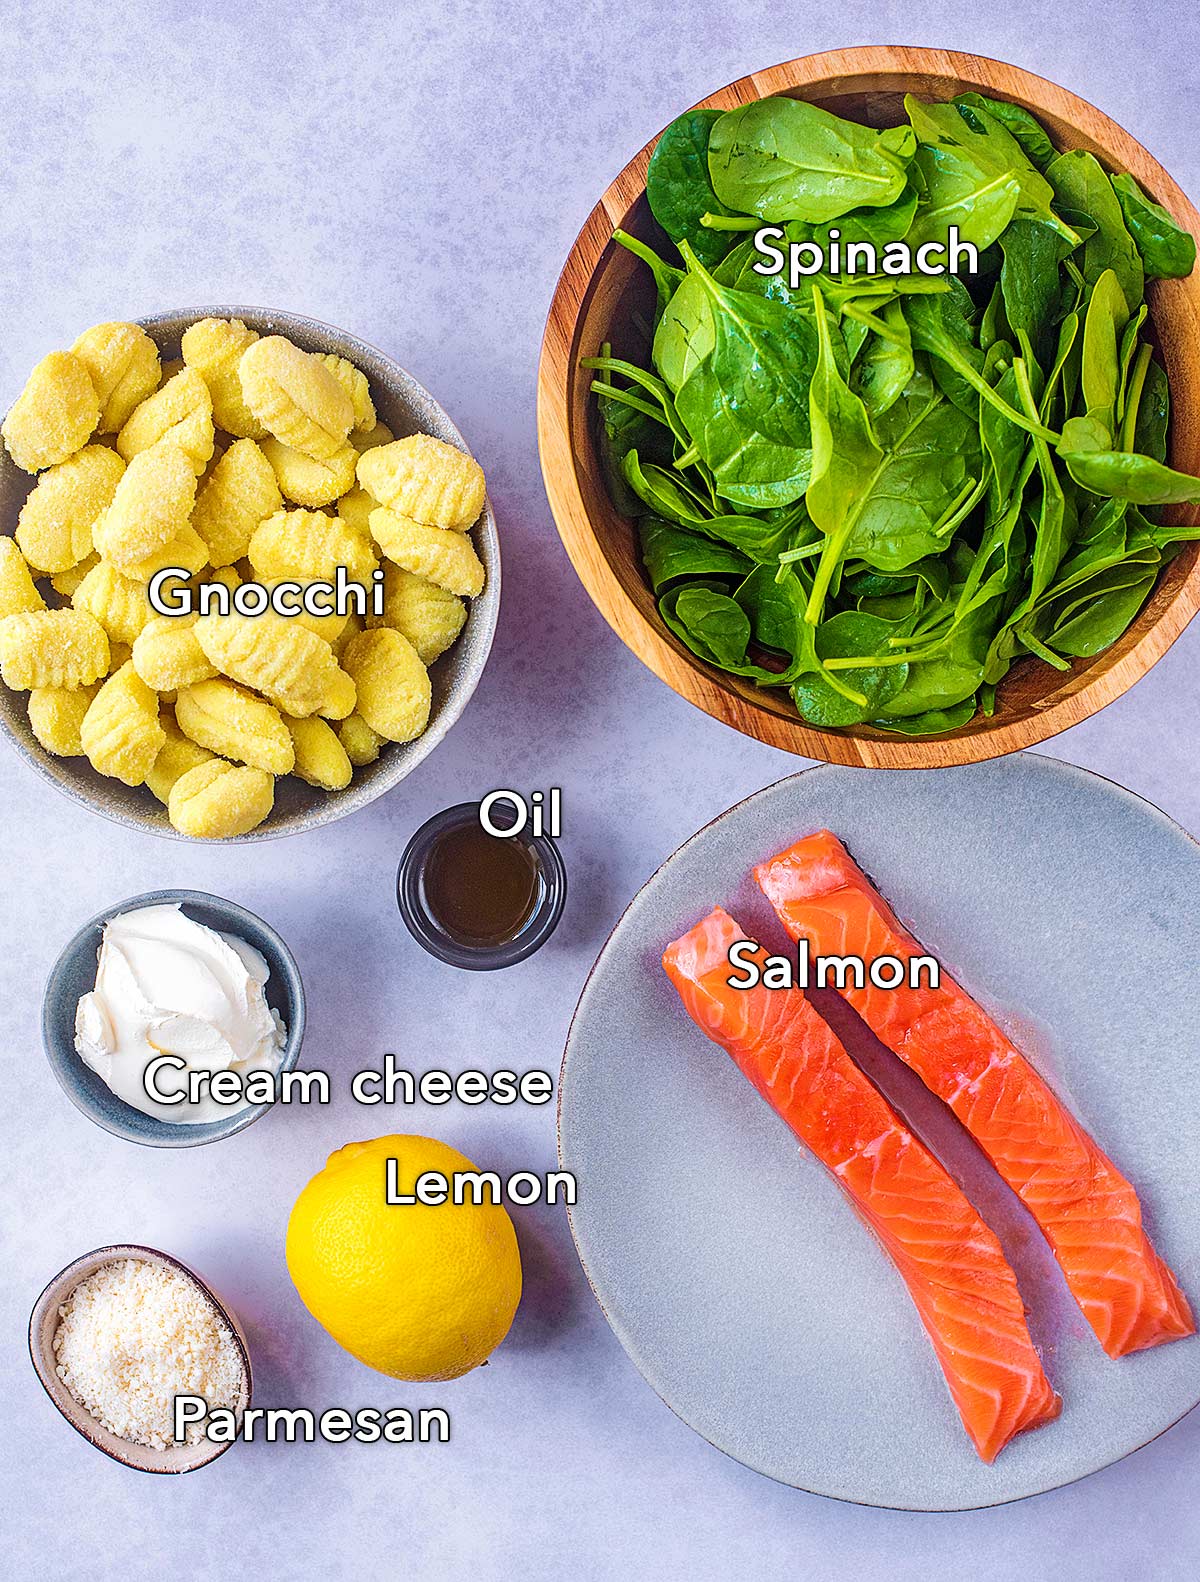 THe ingredients needed for this recipe with text overlay labels.